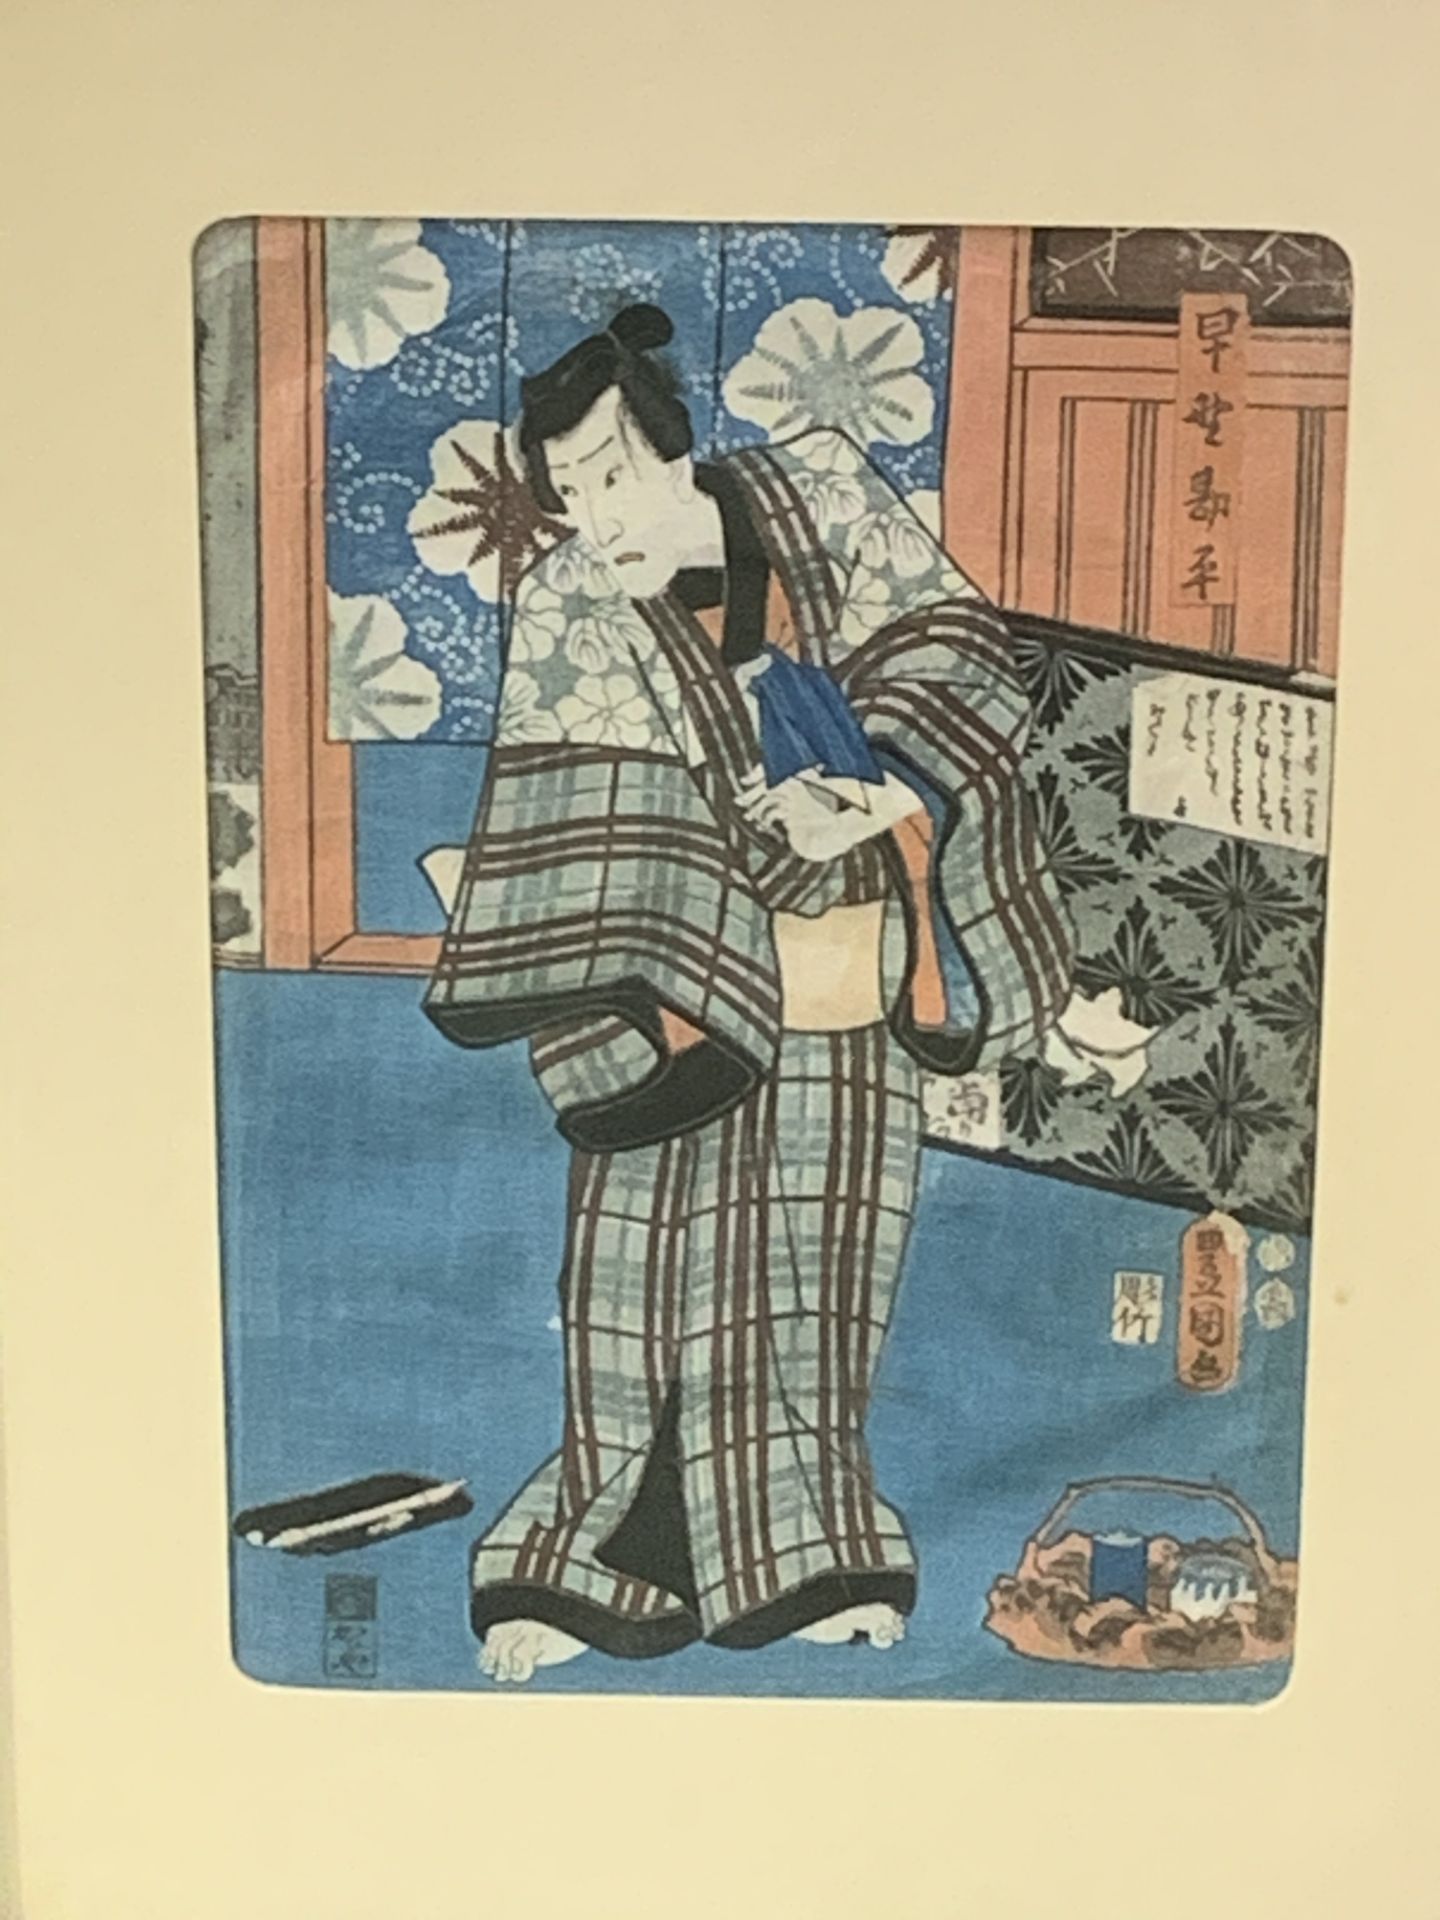 Framed and glazed original Japanese wood block print of a Kabuki actor by Toyokuni, printed in 1854.